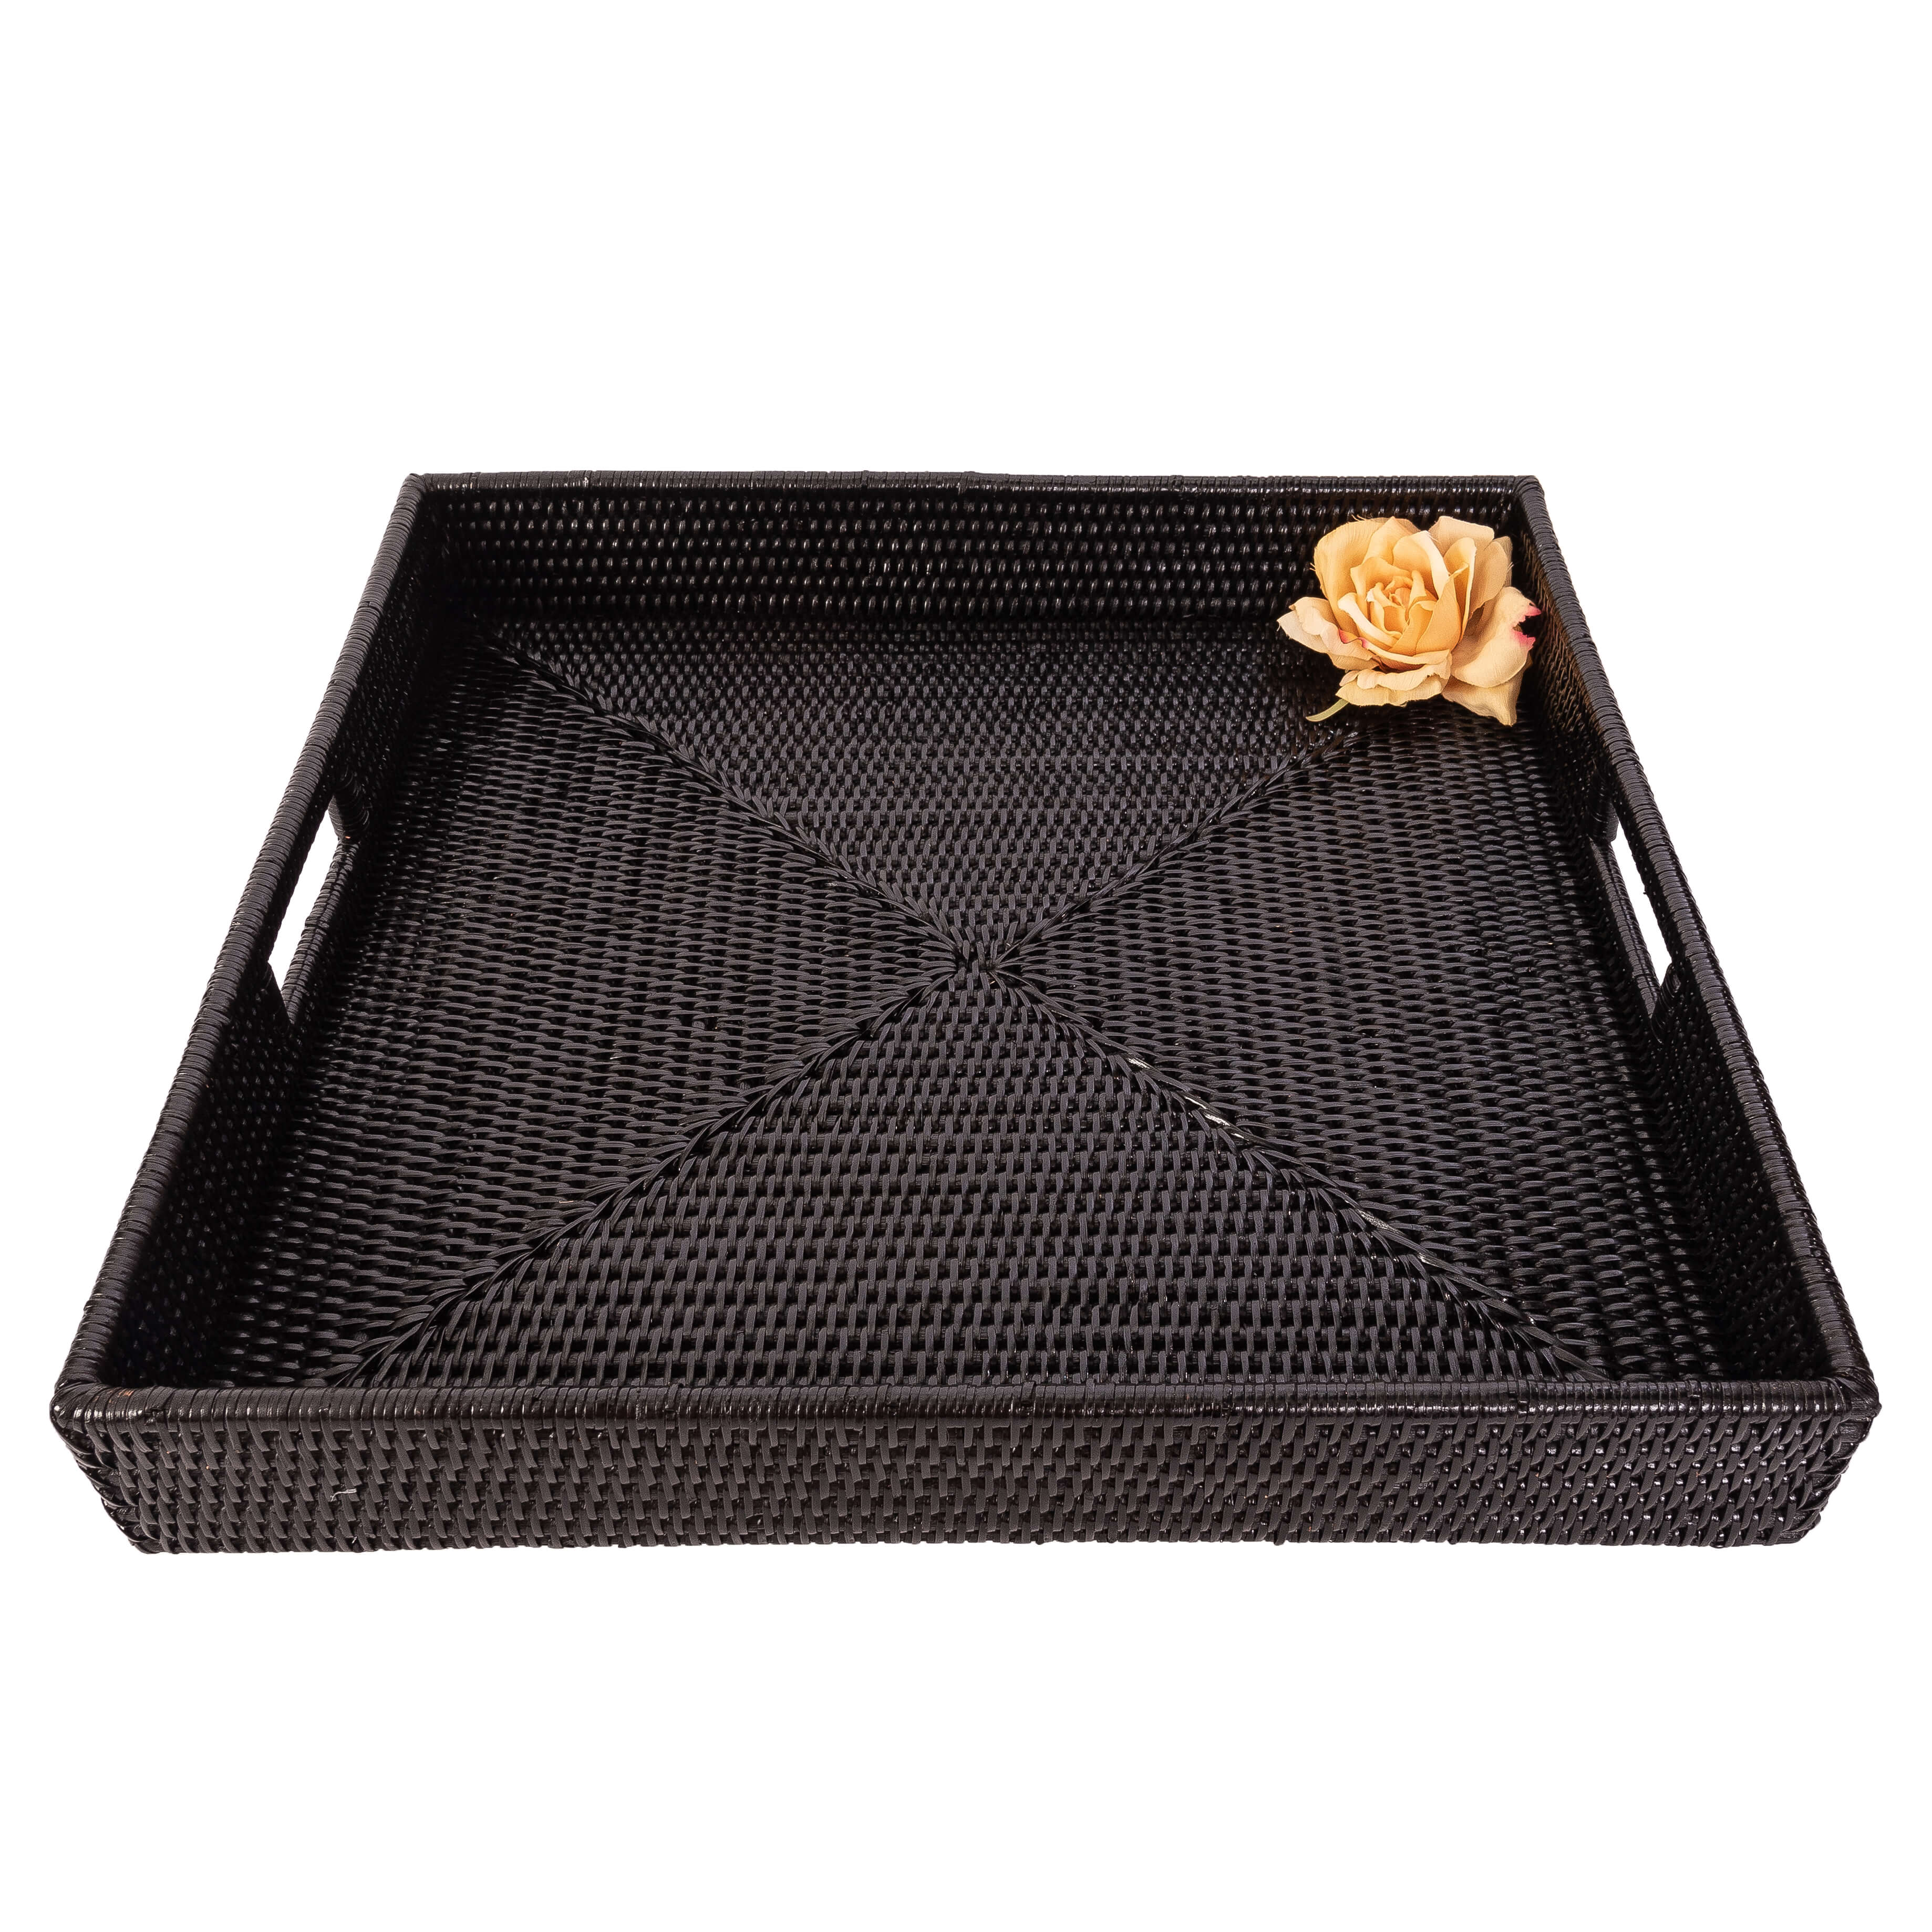 Artifacts Trading Company - Artifacts Rattan Square Serving/Ottoman Tray: 18" / Honey Brown